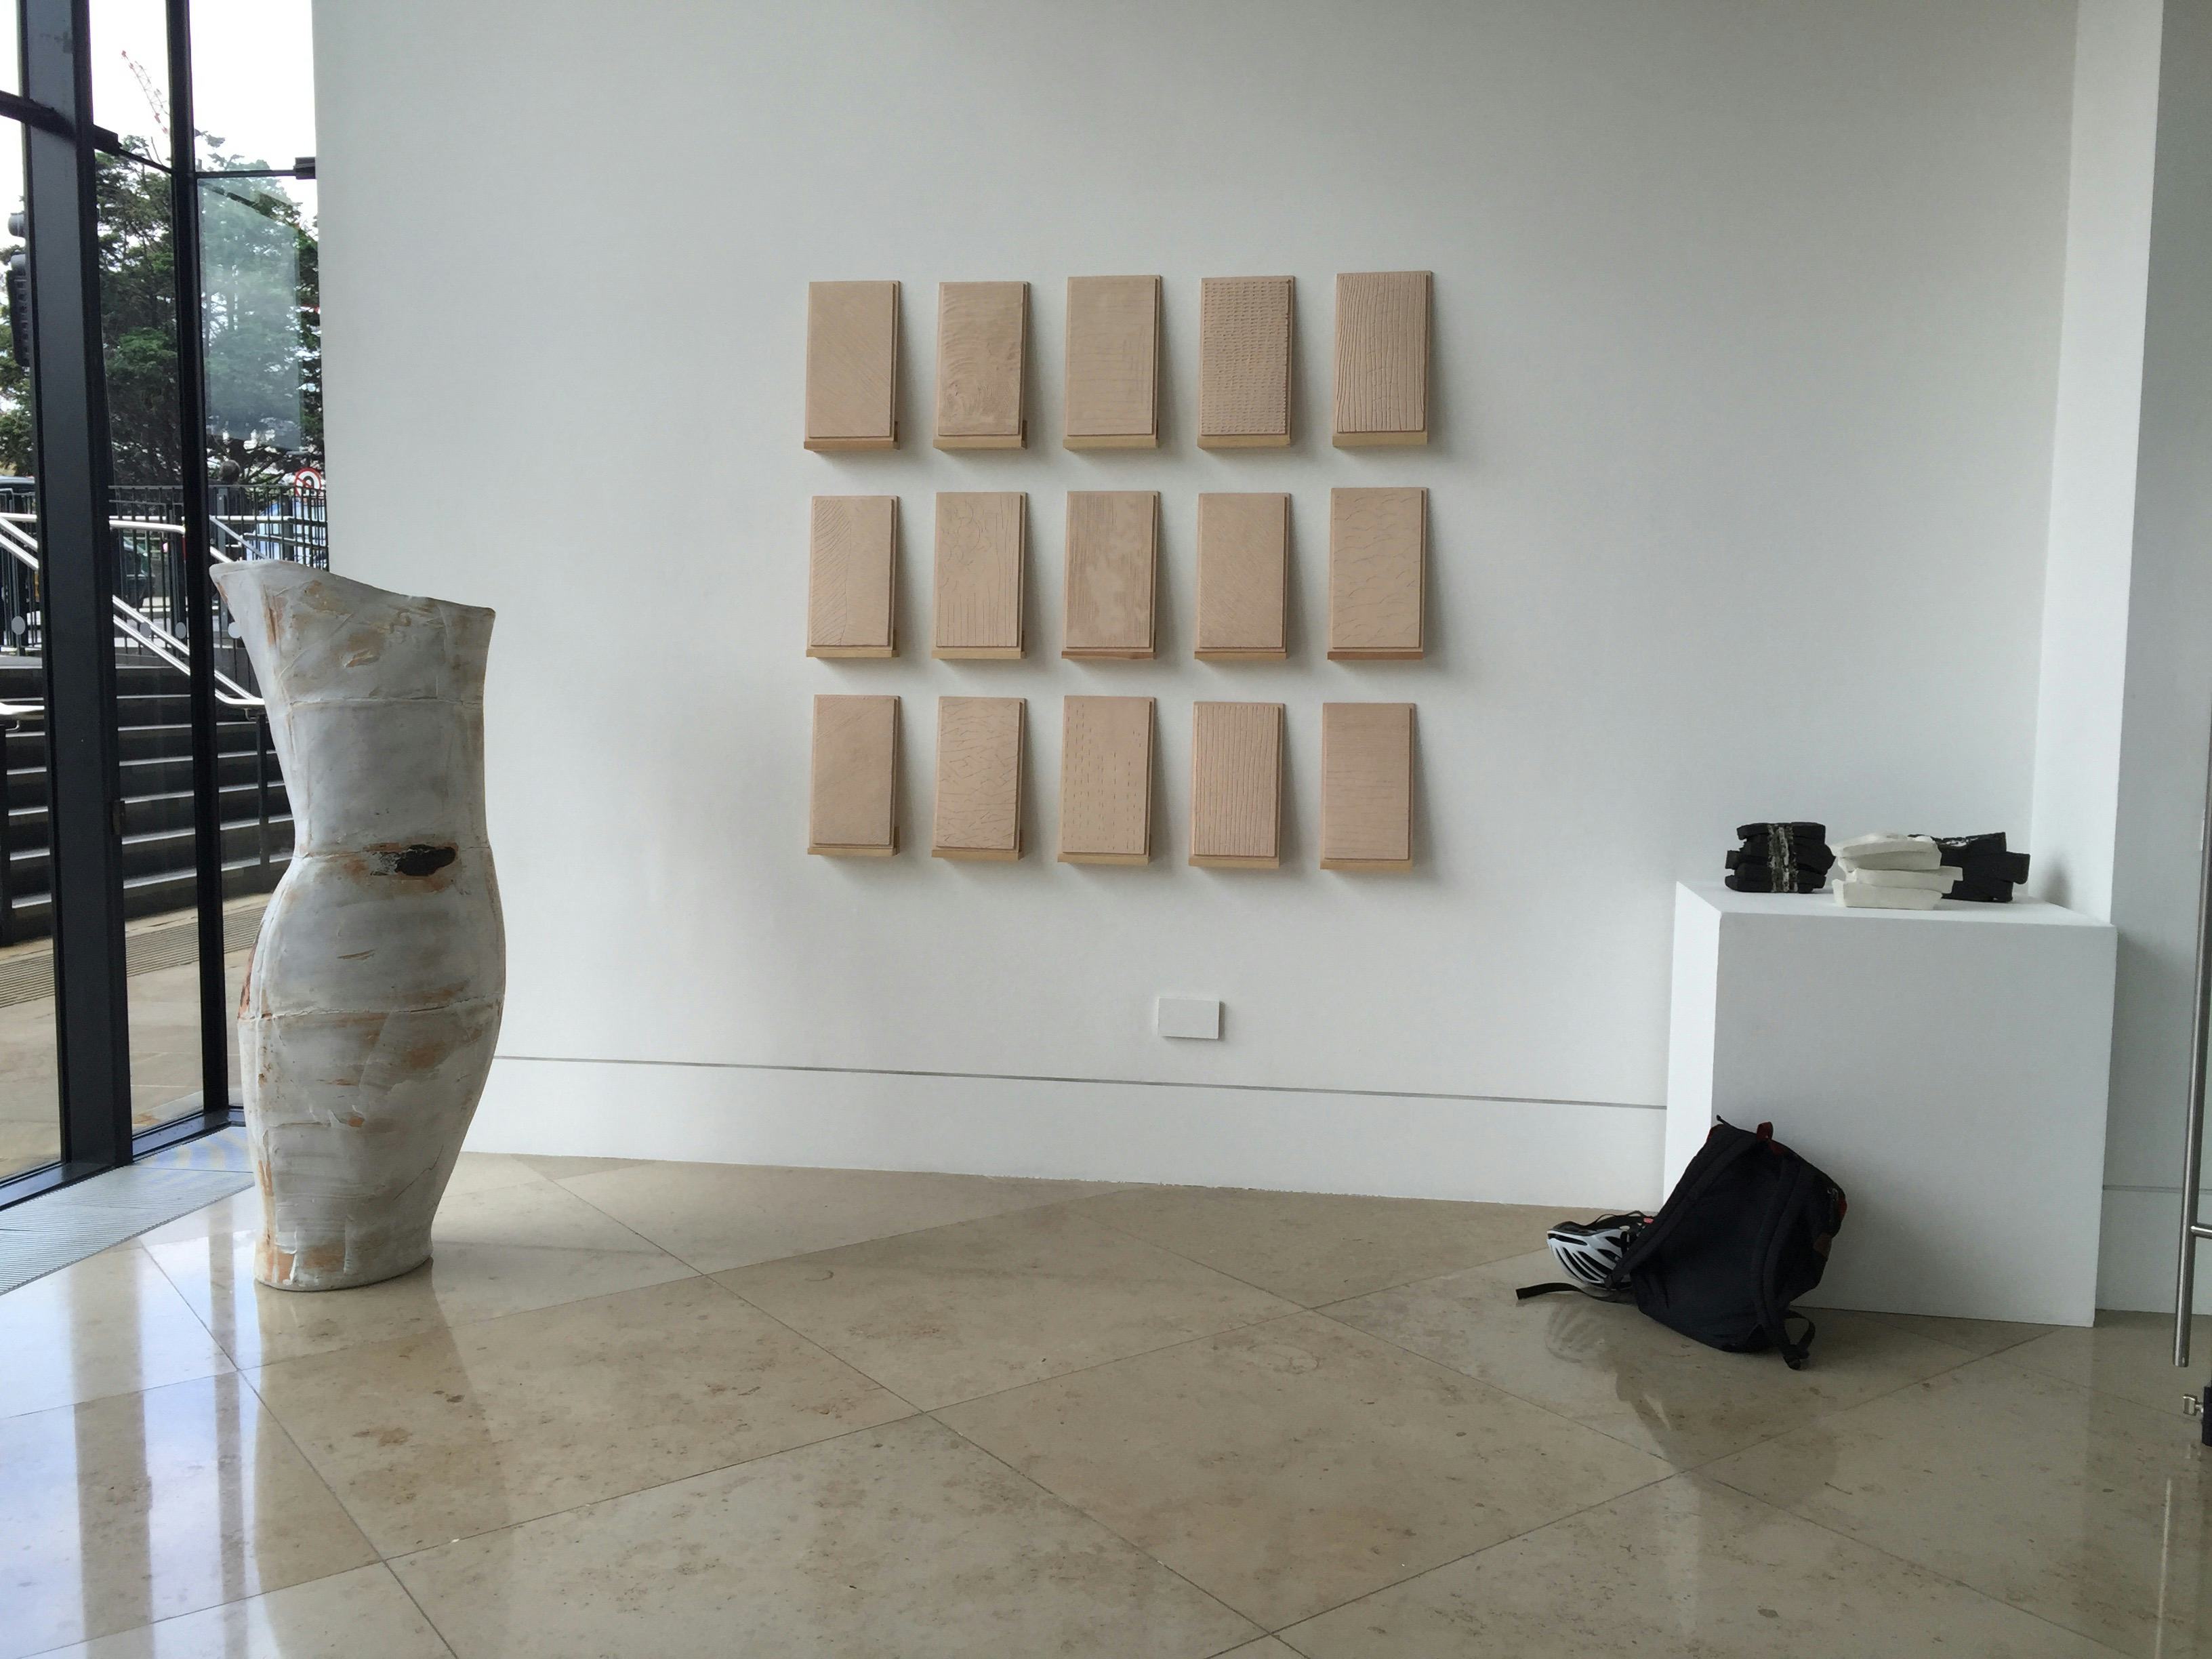 Three rows of 5 tiles sit on individual plinths on a wall alongside other artworks